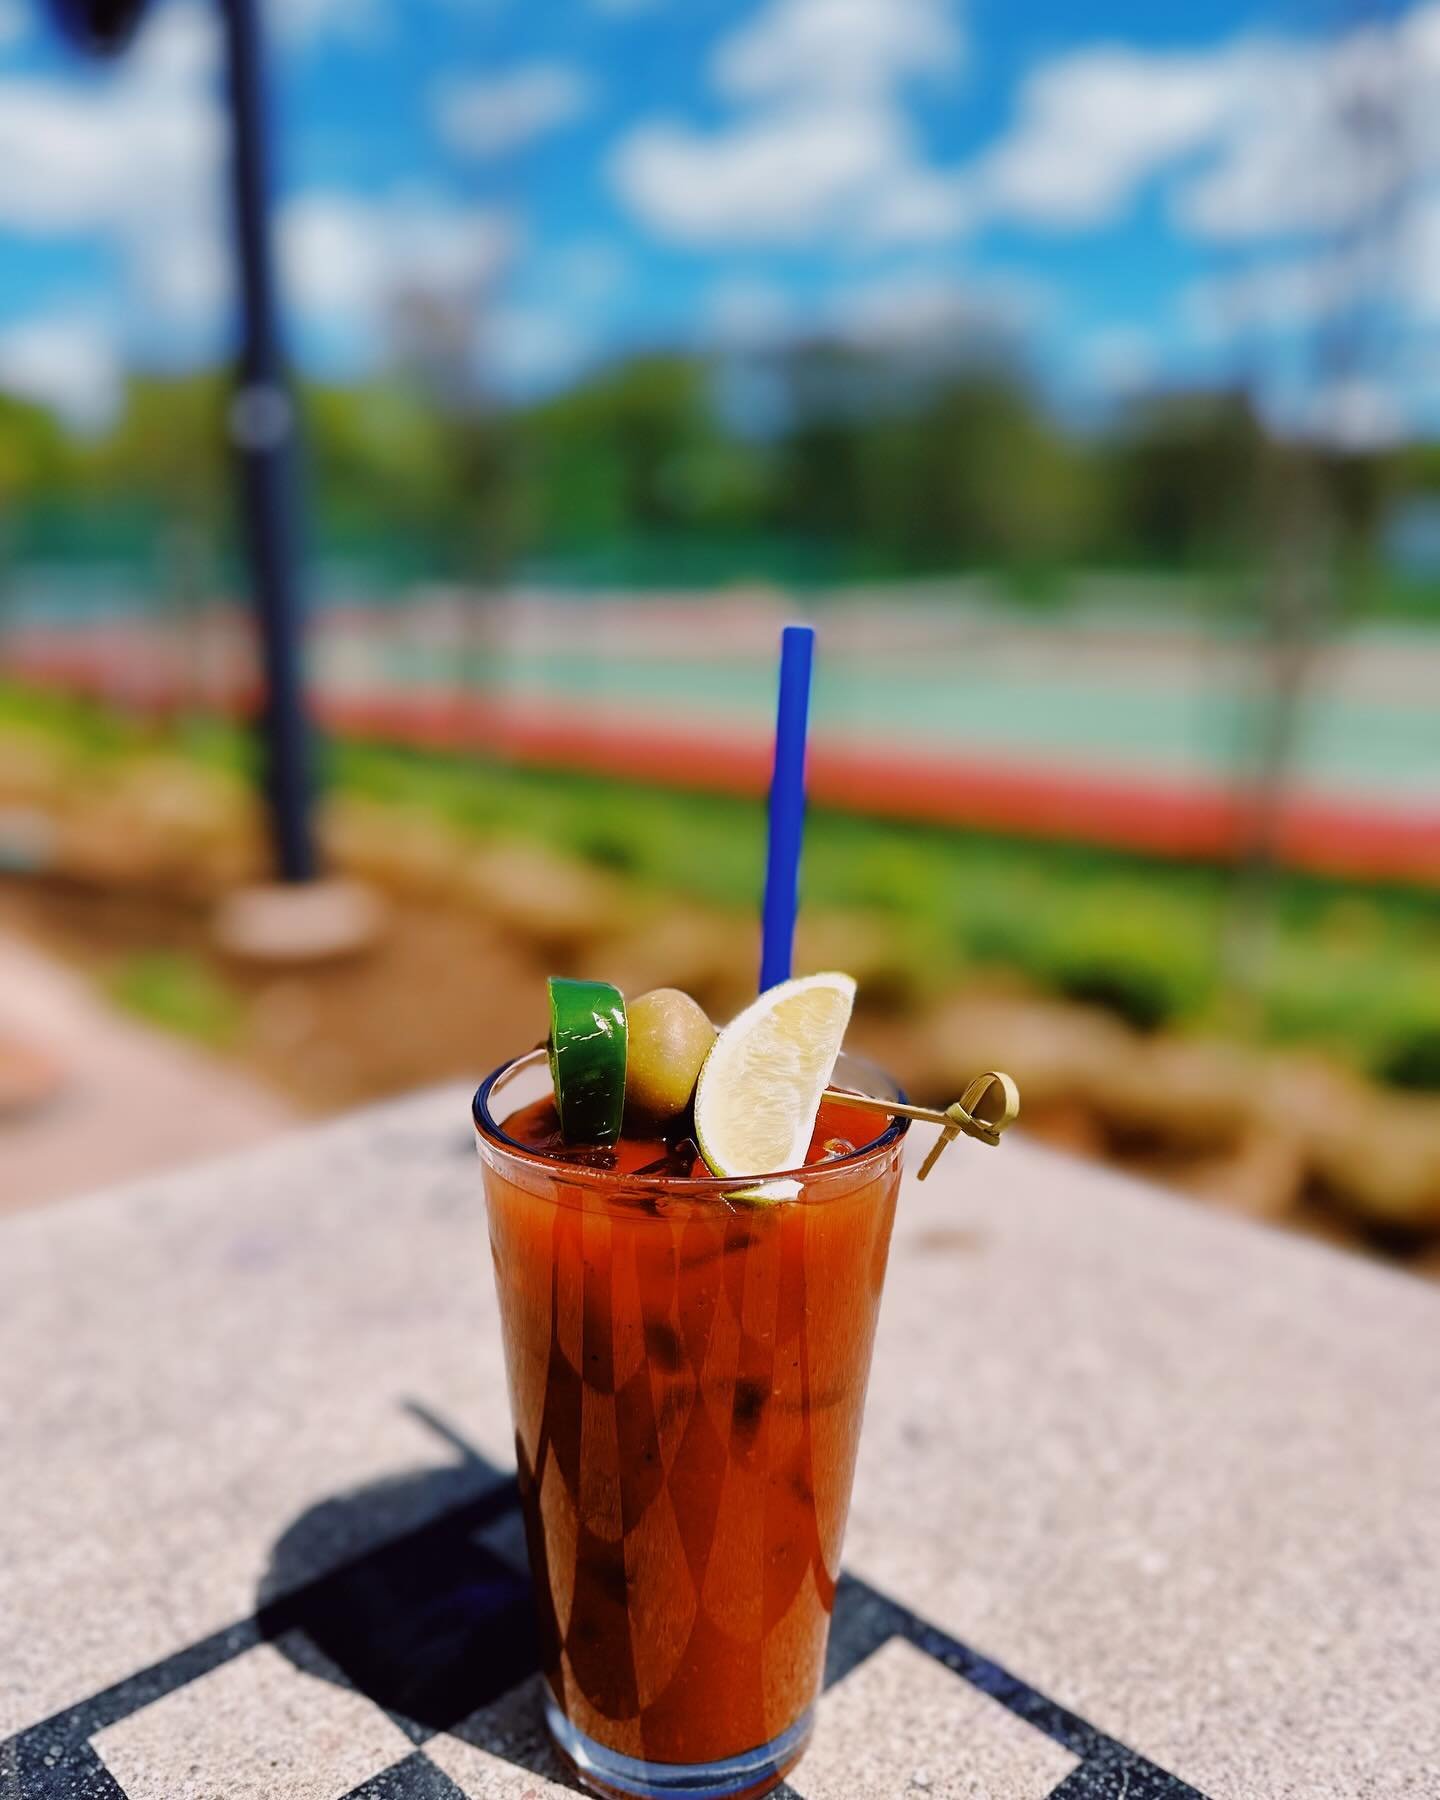 bloodys on the patio anyone?